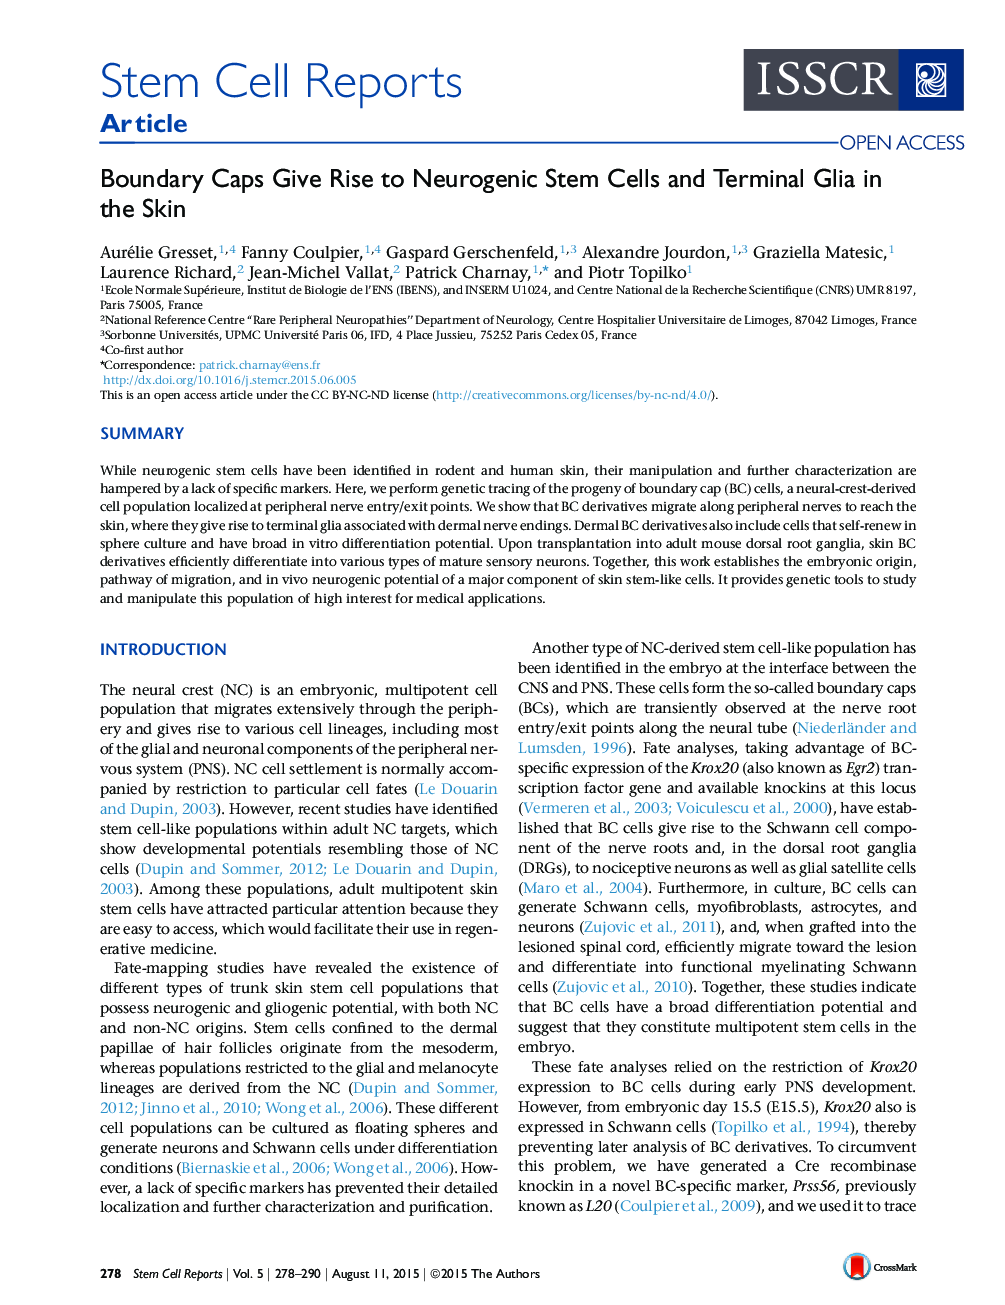 Boundary Caps Give Rise to Neurogenic Stem Cells and Terminal Glia in the Skin 